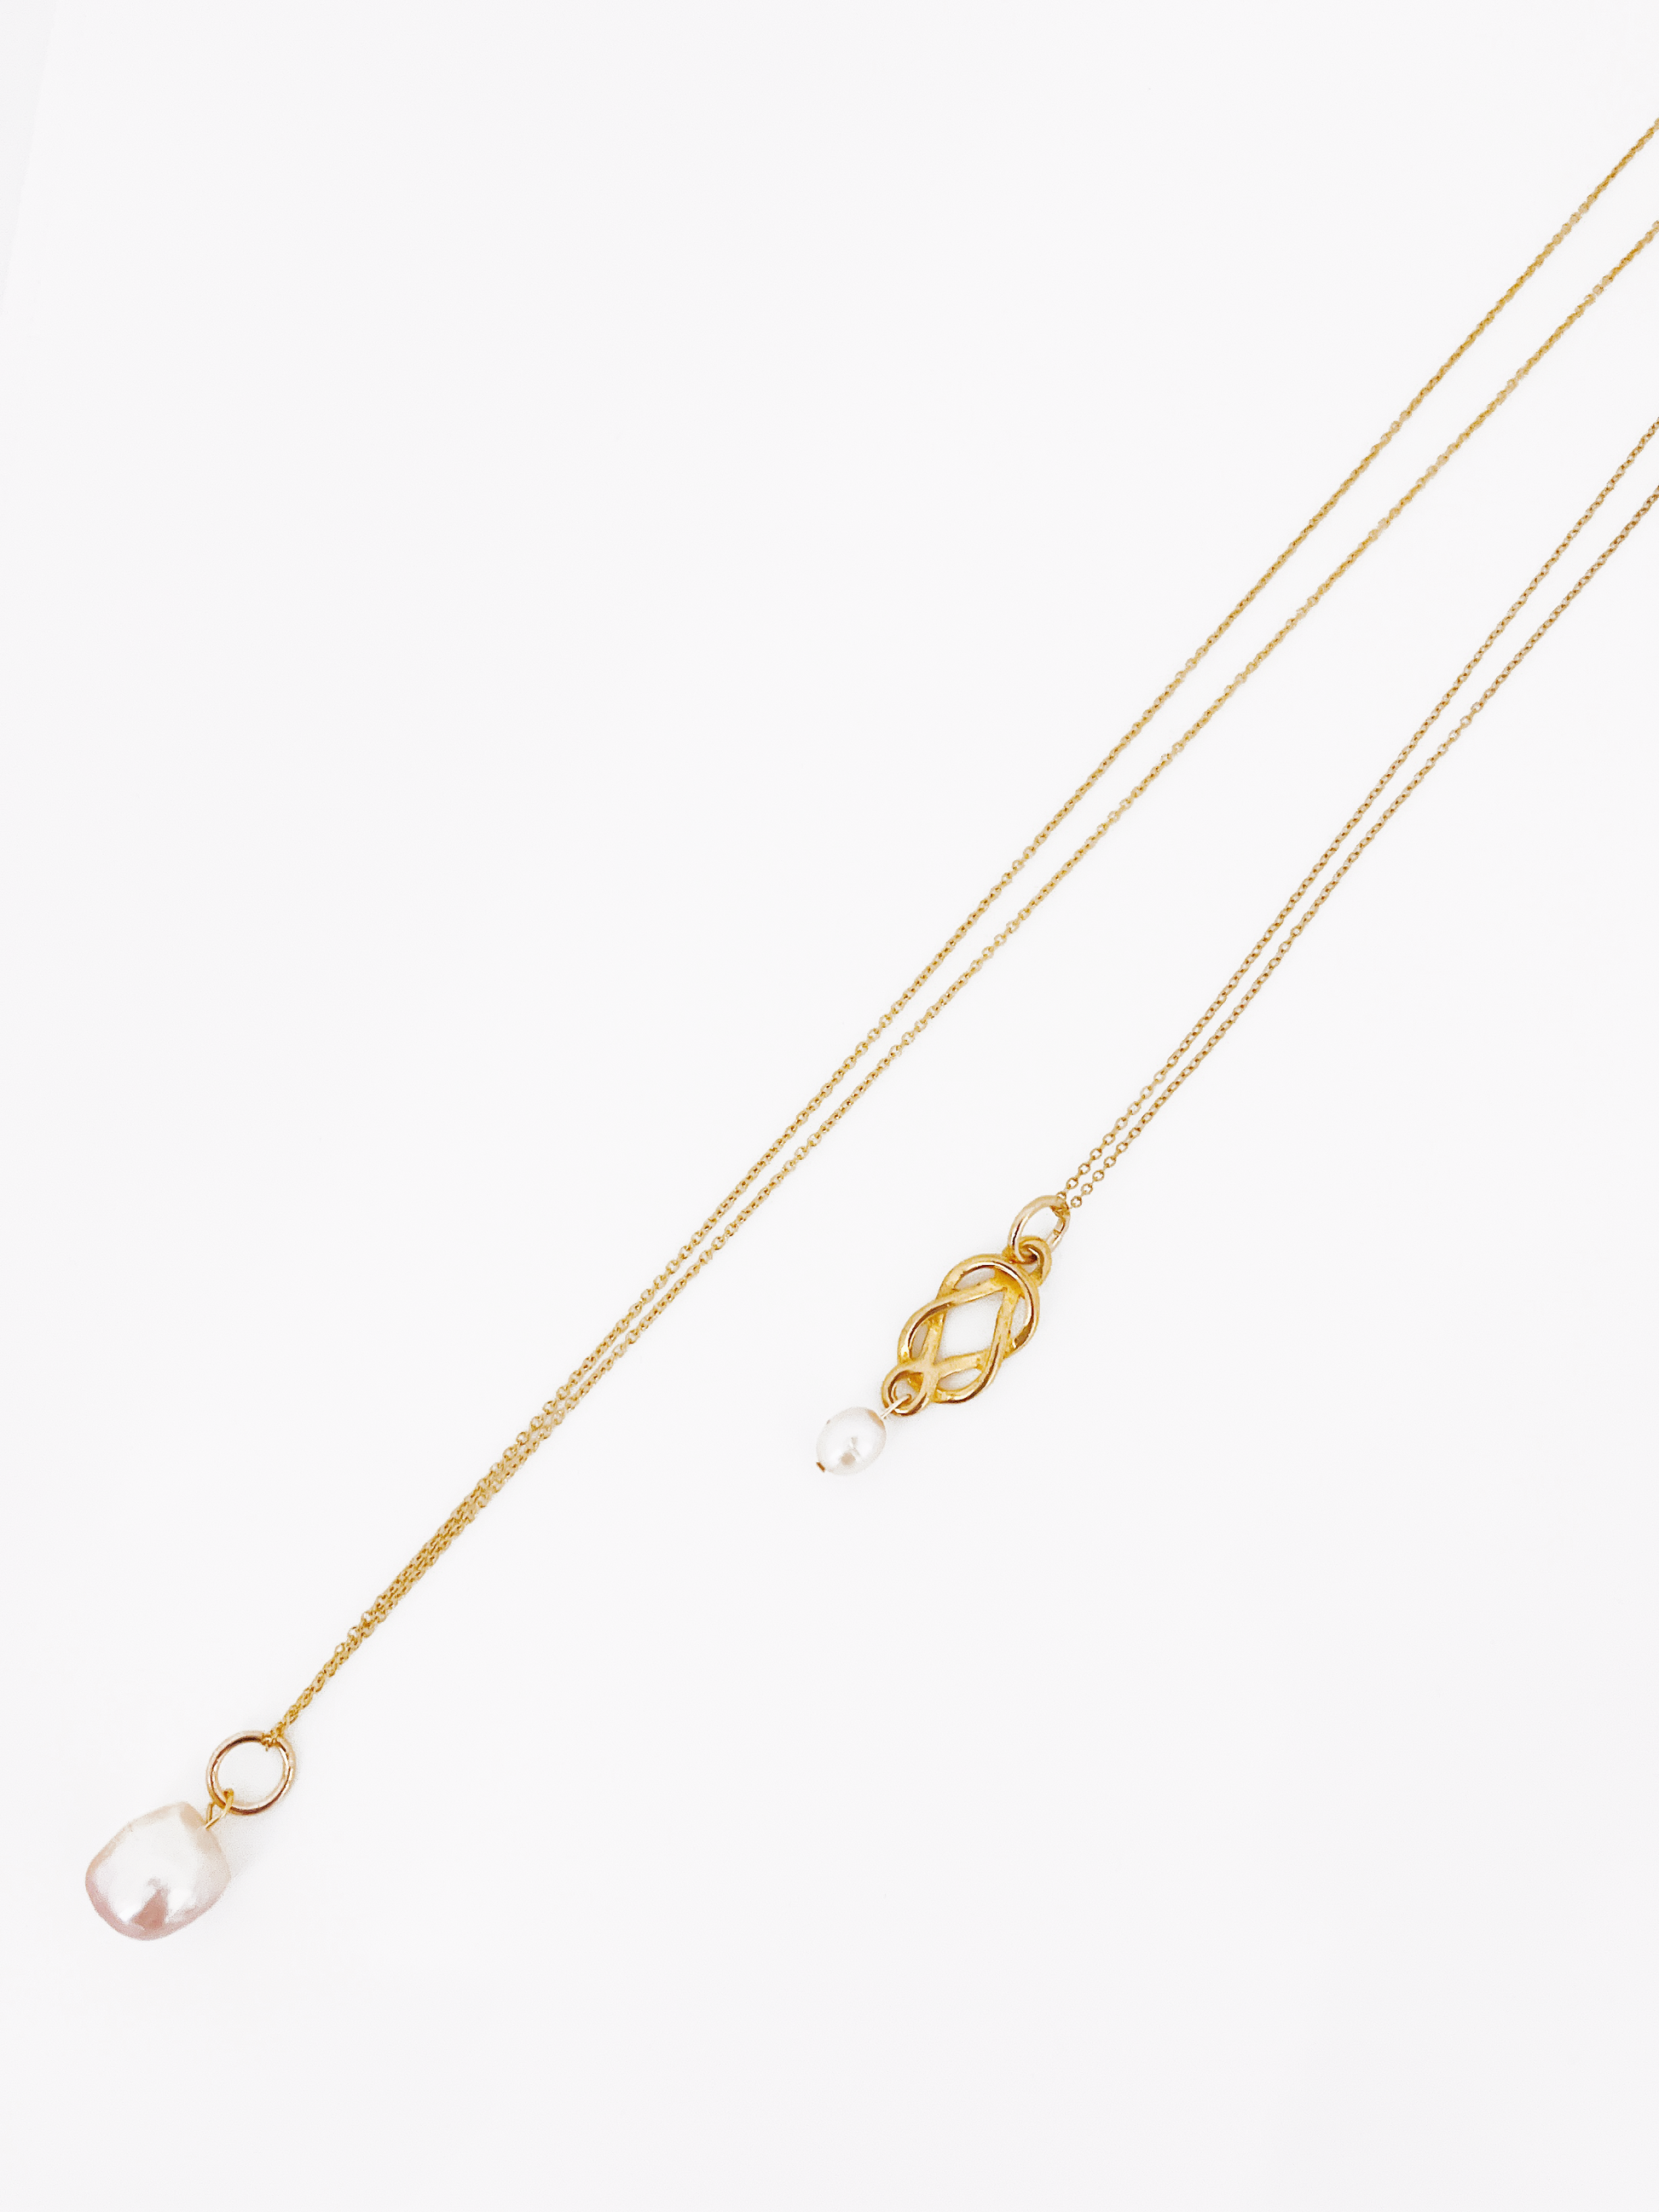 Necklace of infinite charm with a pink freshwater pearl by Hikaru Pearl